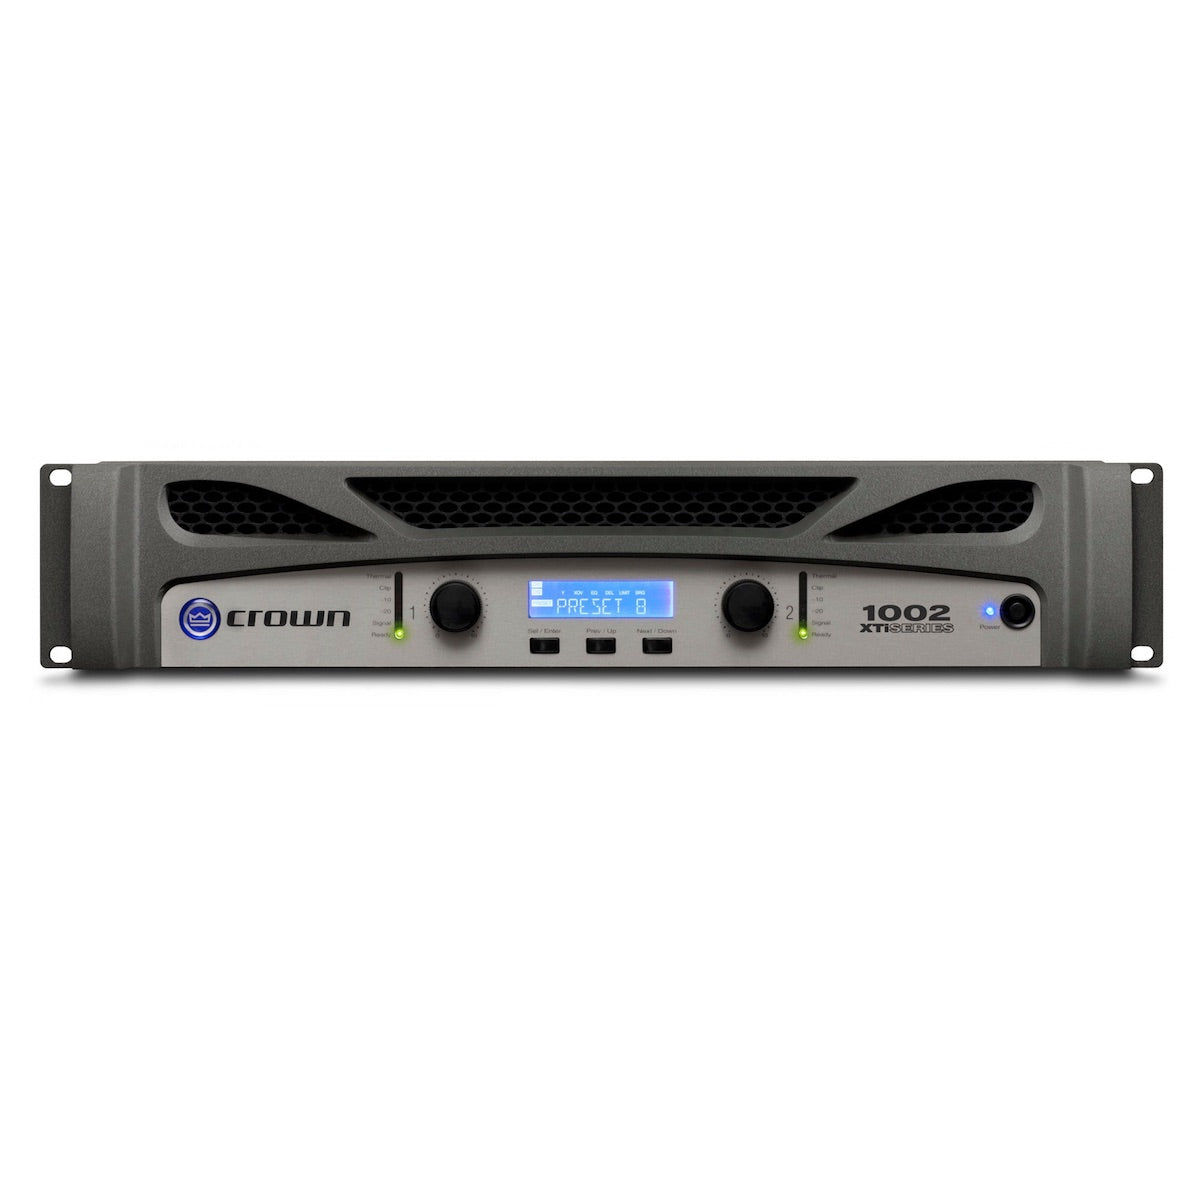 Crown XTi 1002 - Two-channel, 500W Power Amplifier, front